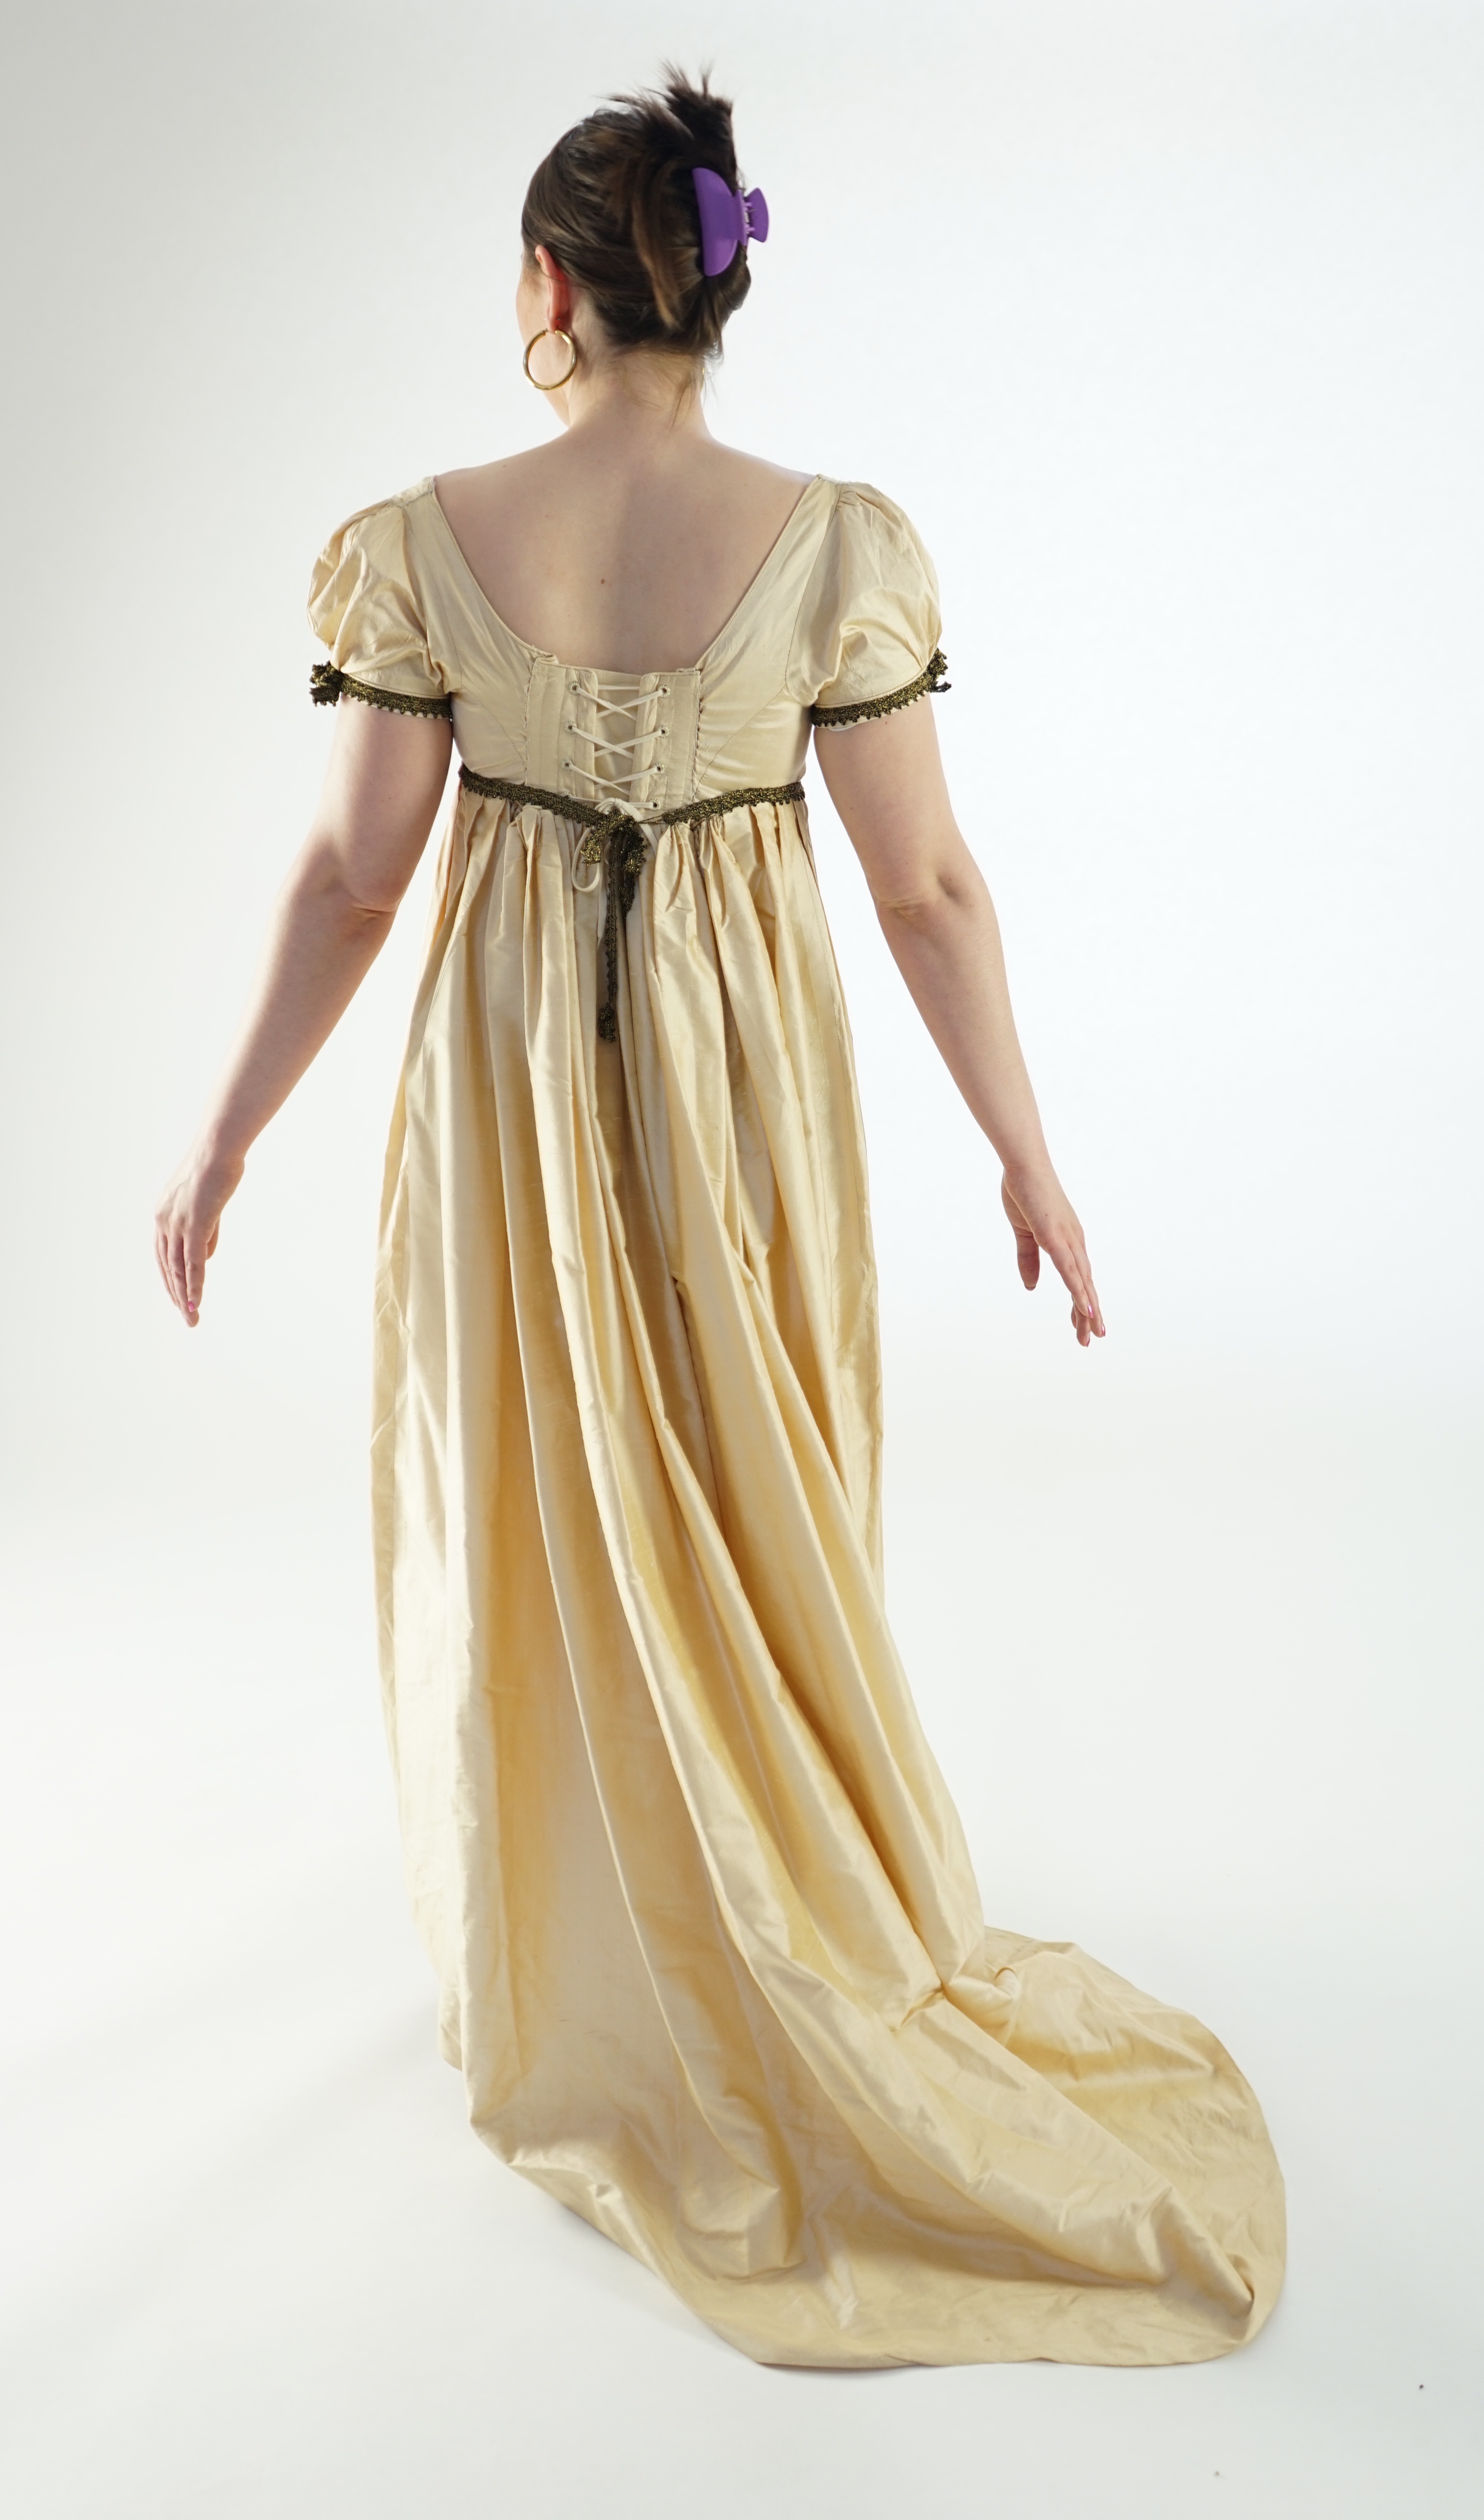 A lady's Regency style day dress in cream silk with black lace trim (lacing at back). Ex London Festival Opera 'Cosi fan tutte'